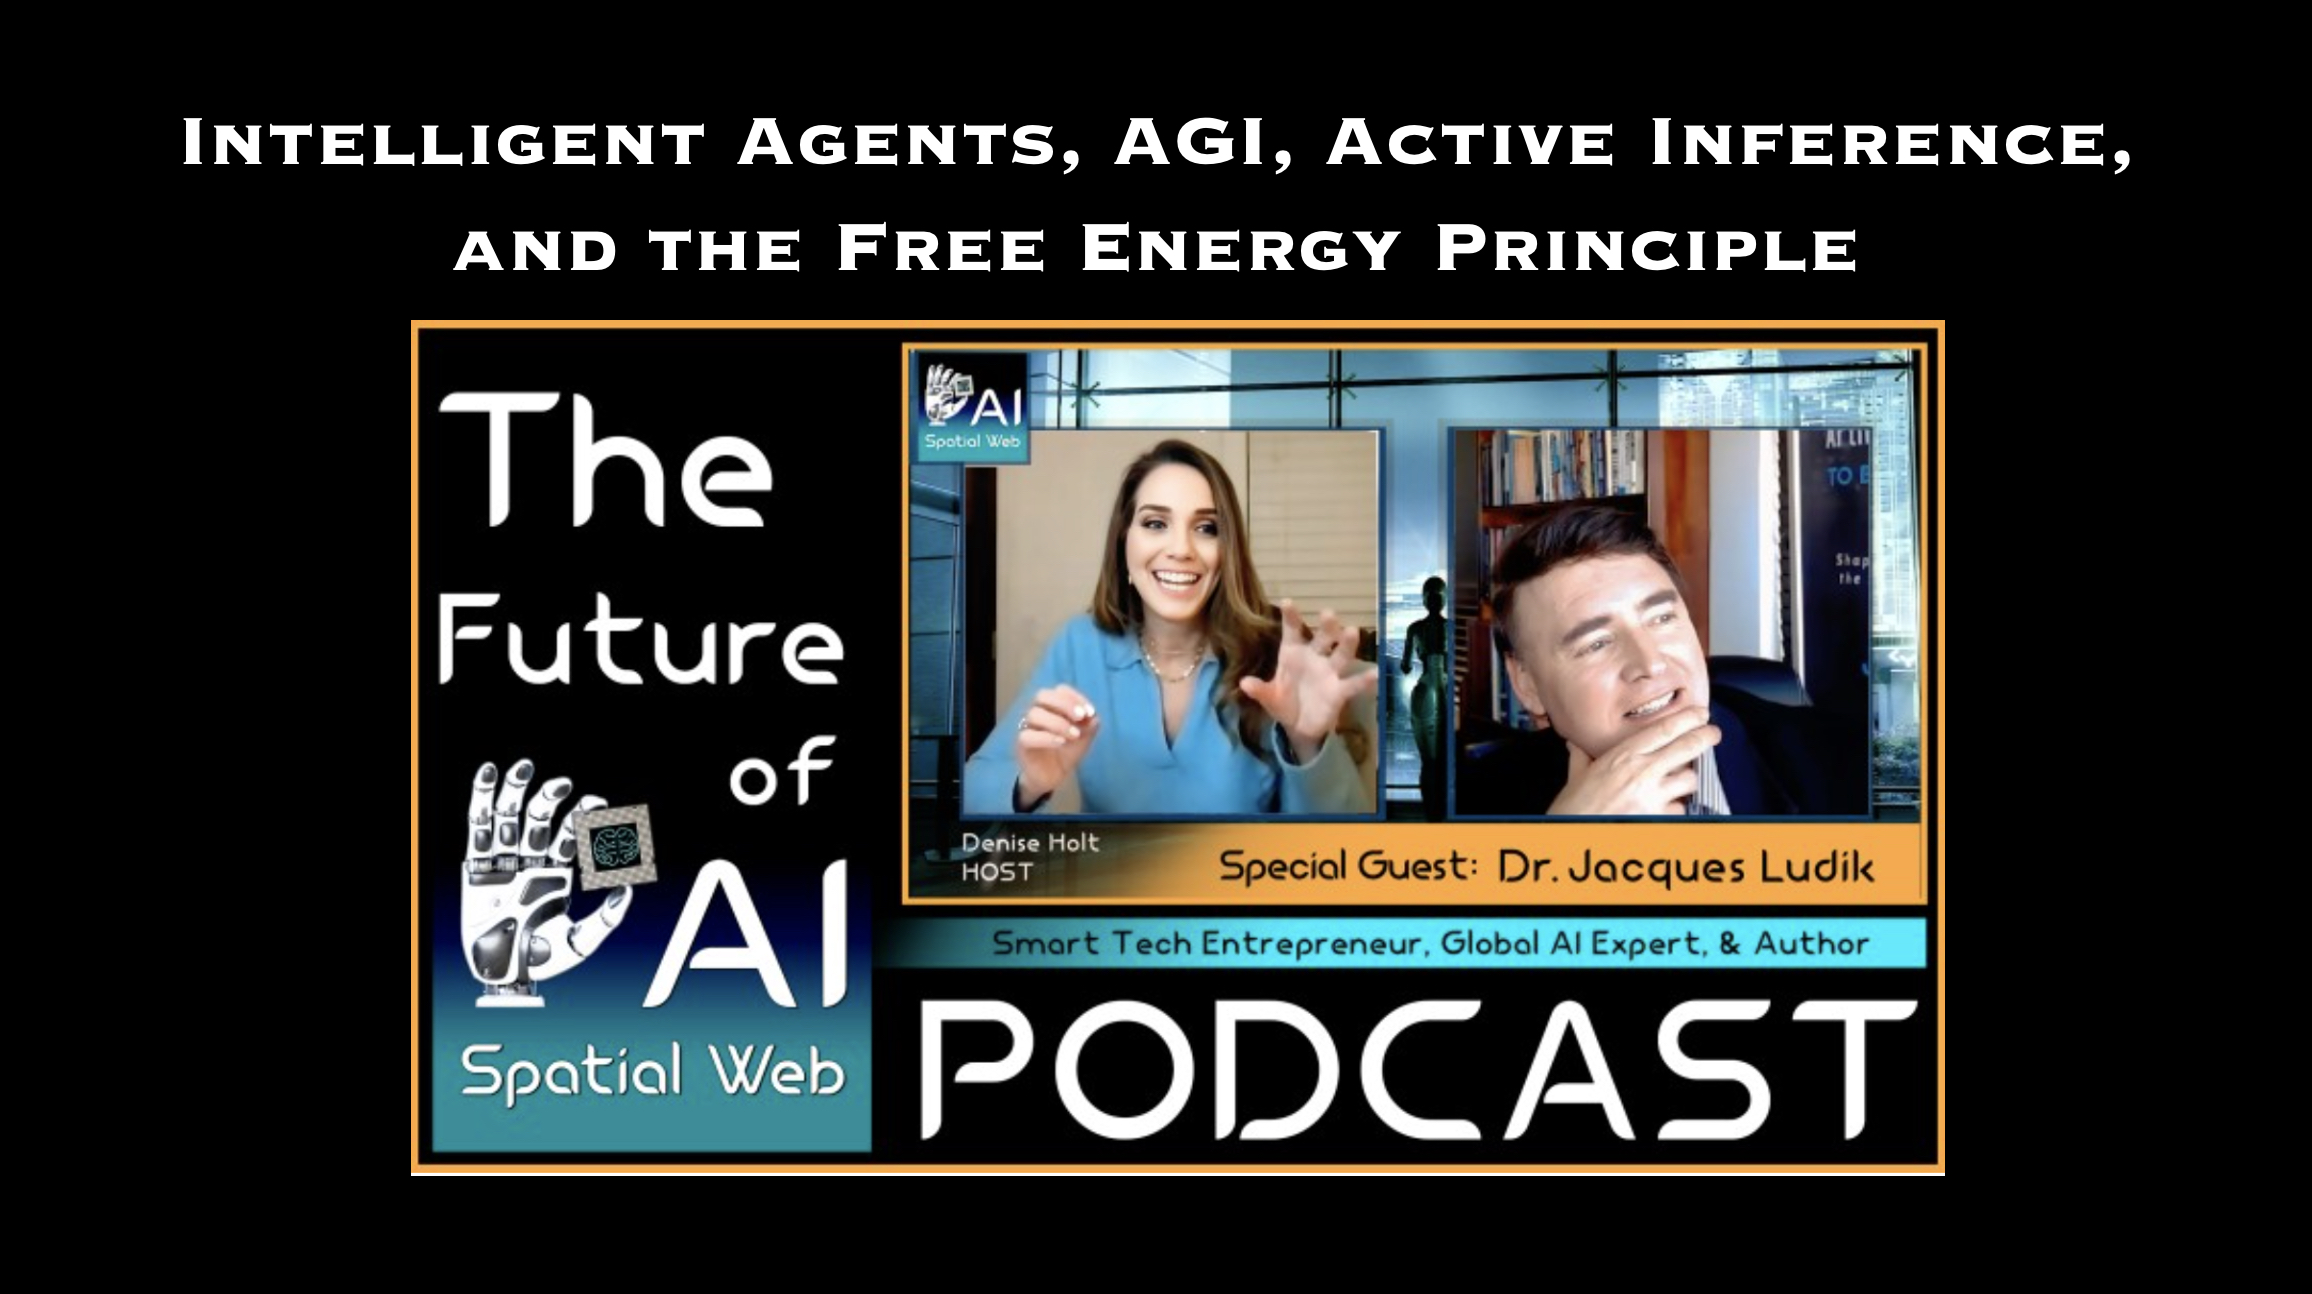 Intelligent Agents, AGI, Active Inference and the Free Energy Principle